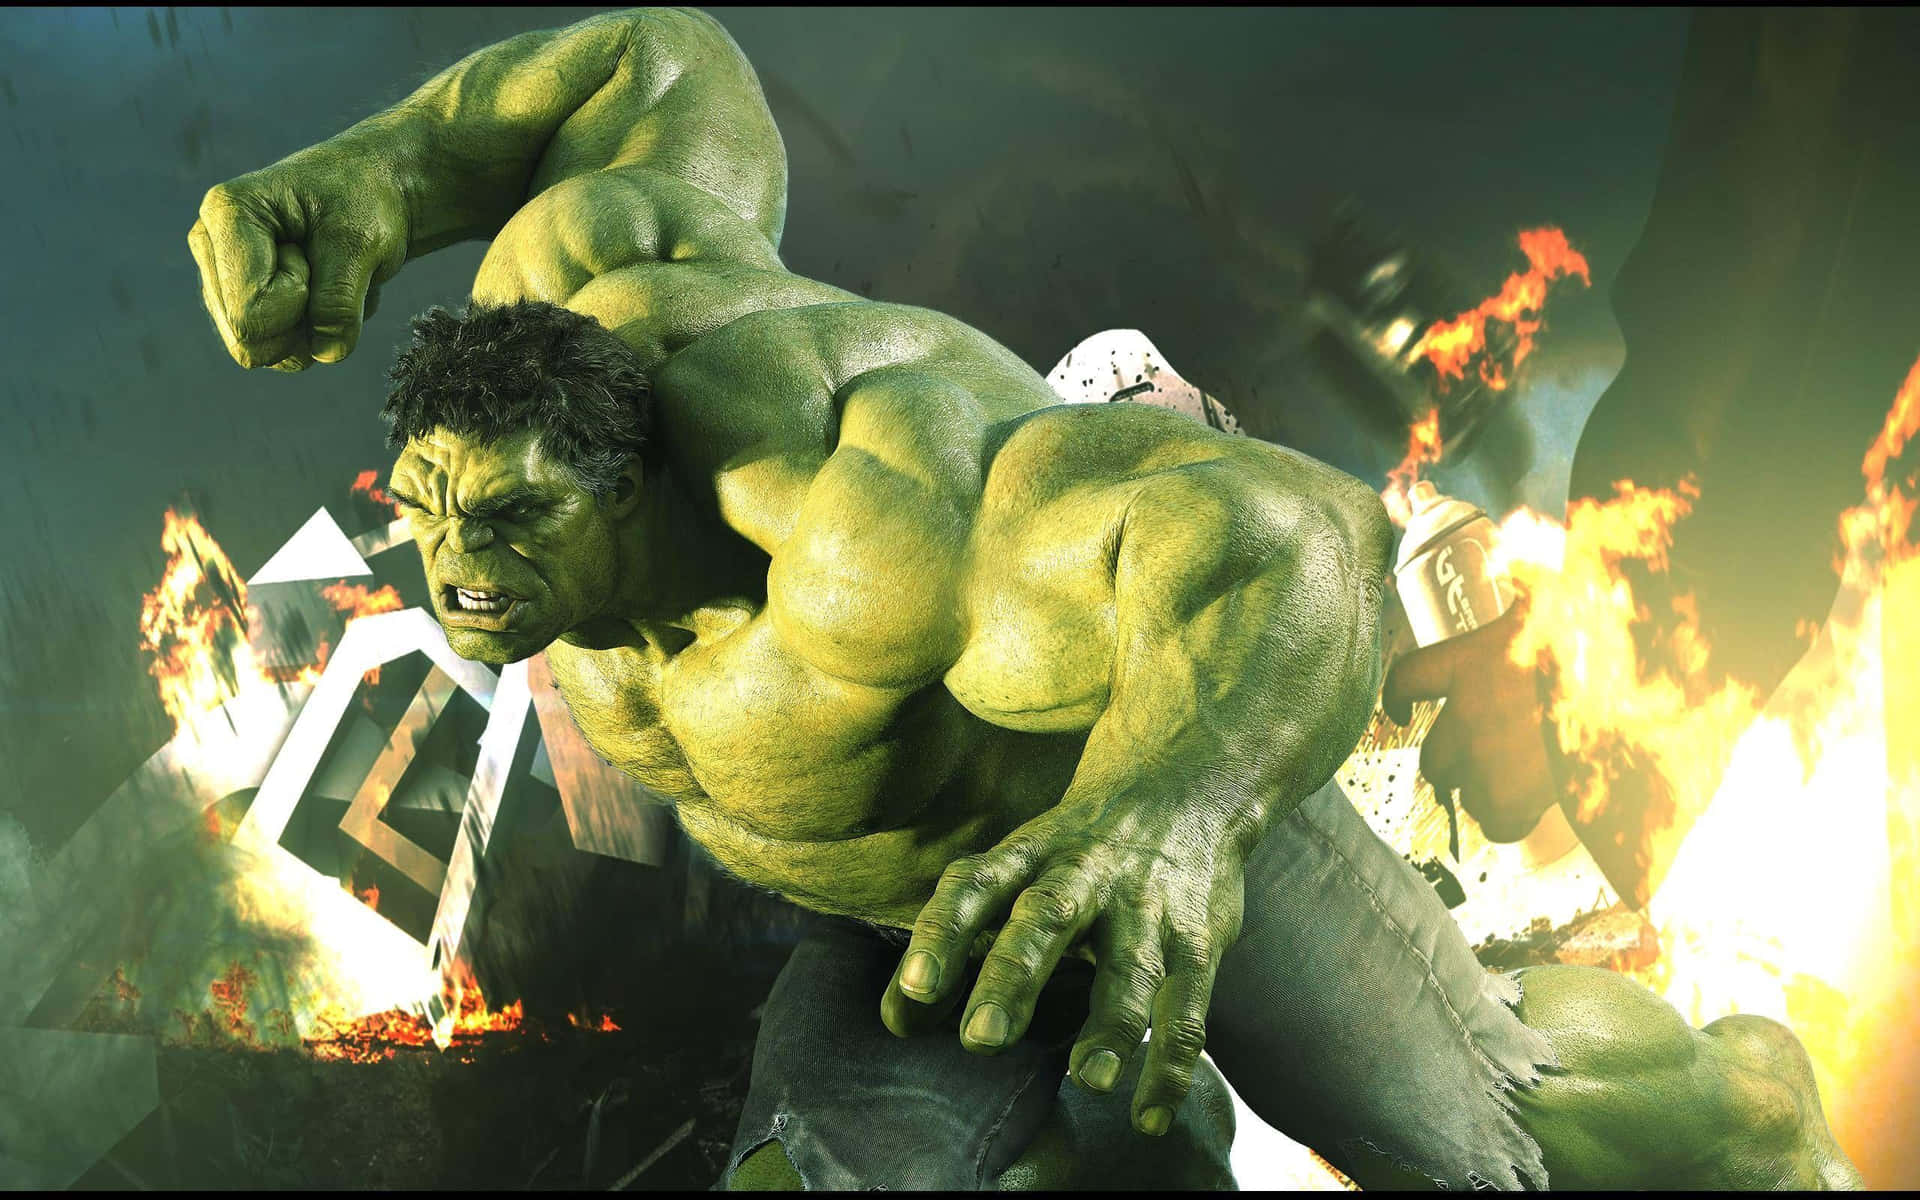 "Feel the power of the incredible Hulk".